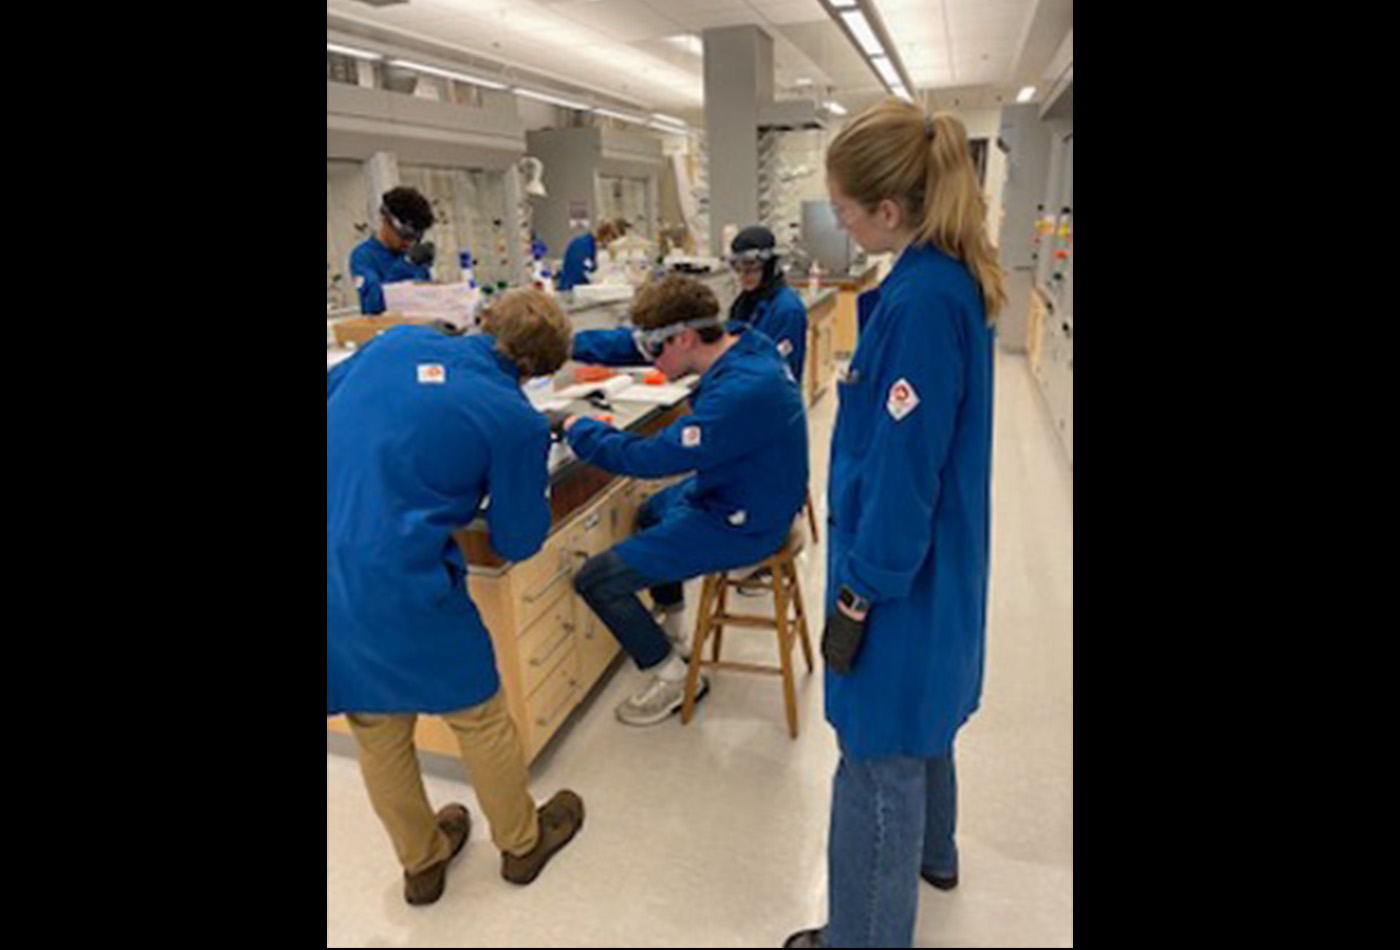 A group of students in lab coats mill about a lab.